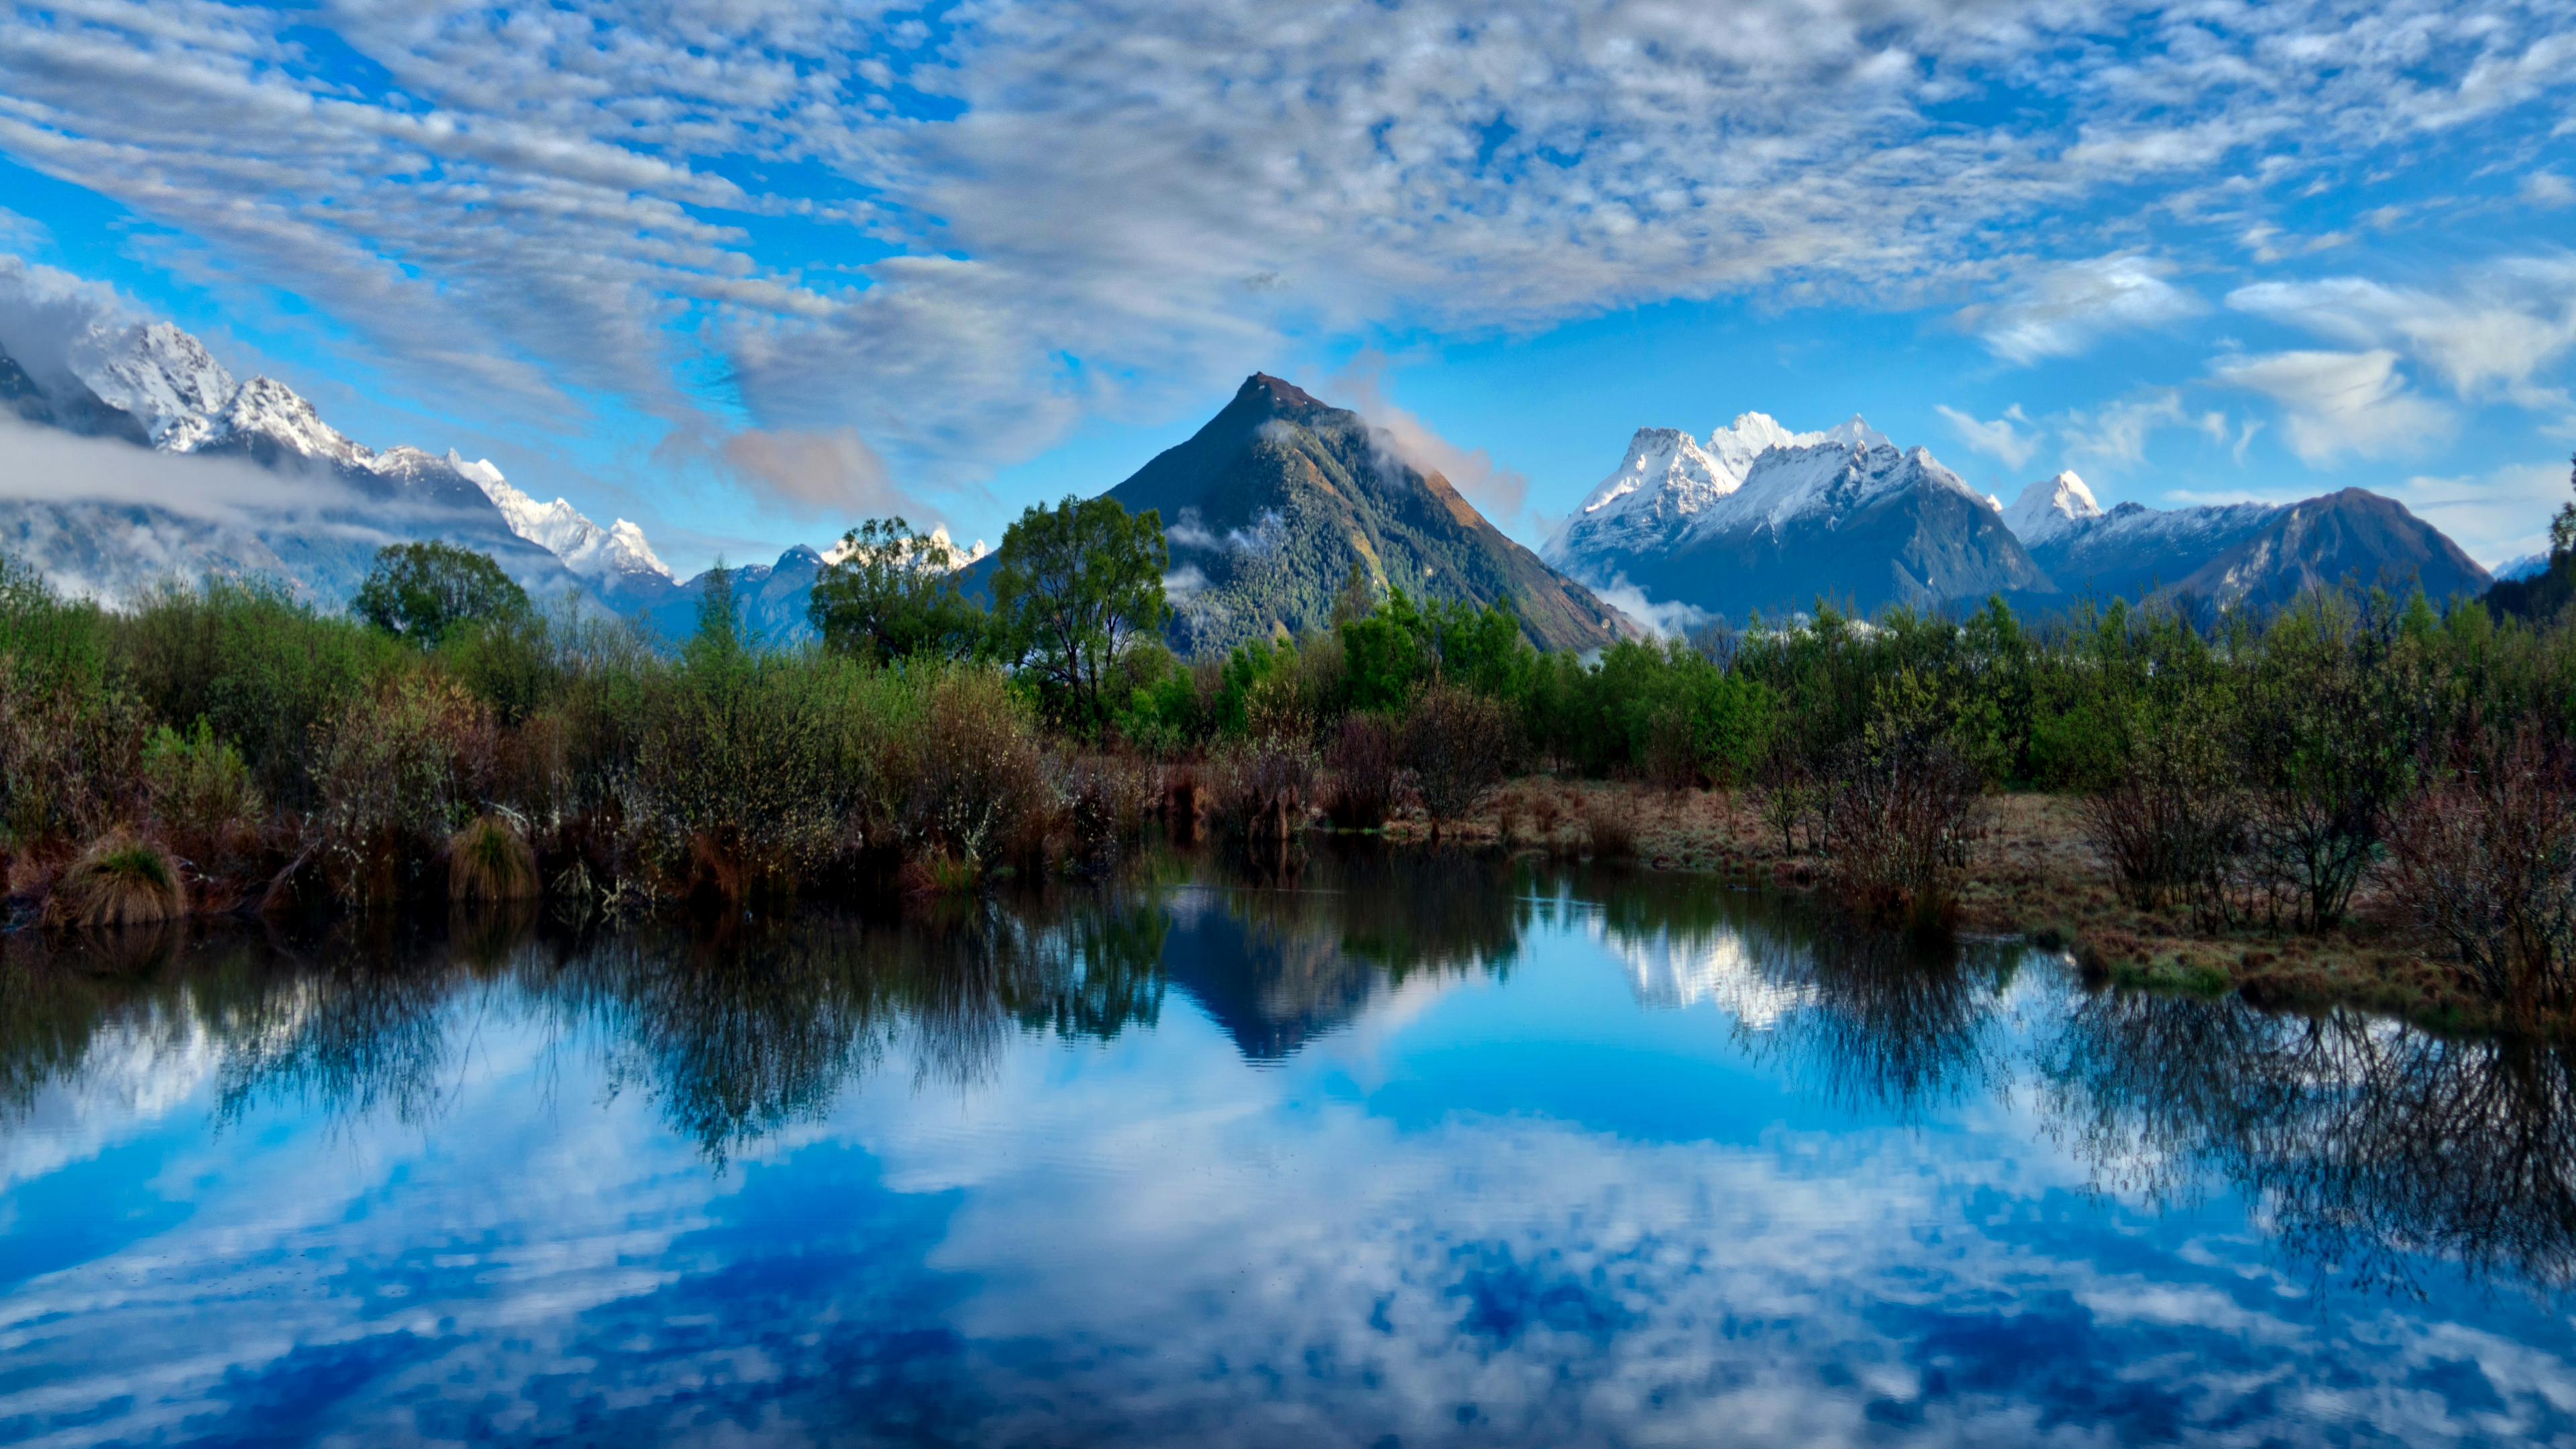 Trey Ratcliff Photography Landscape New Zealand Mountains Water Lake Trees Mountain Chain Snow Sky C 3840x2160